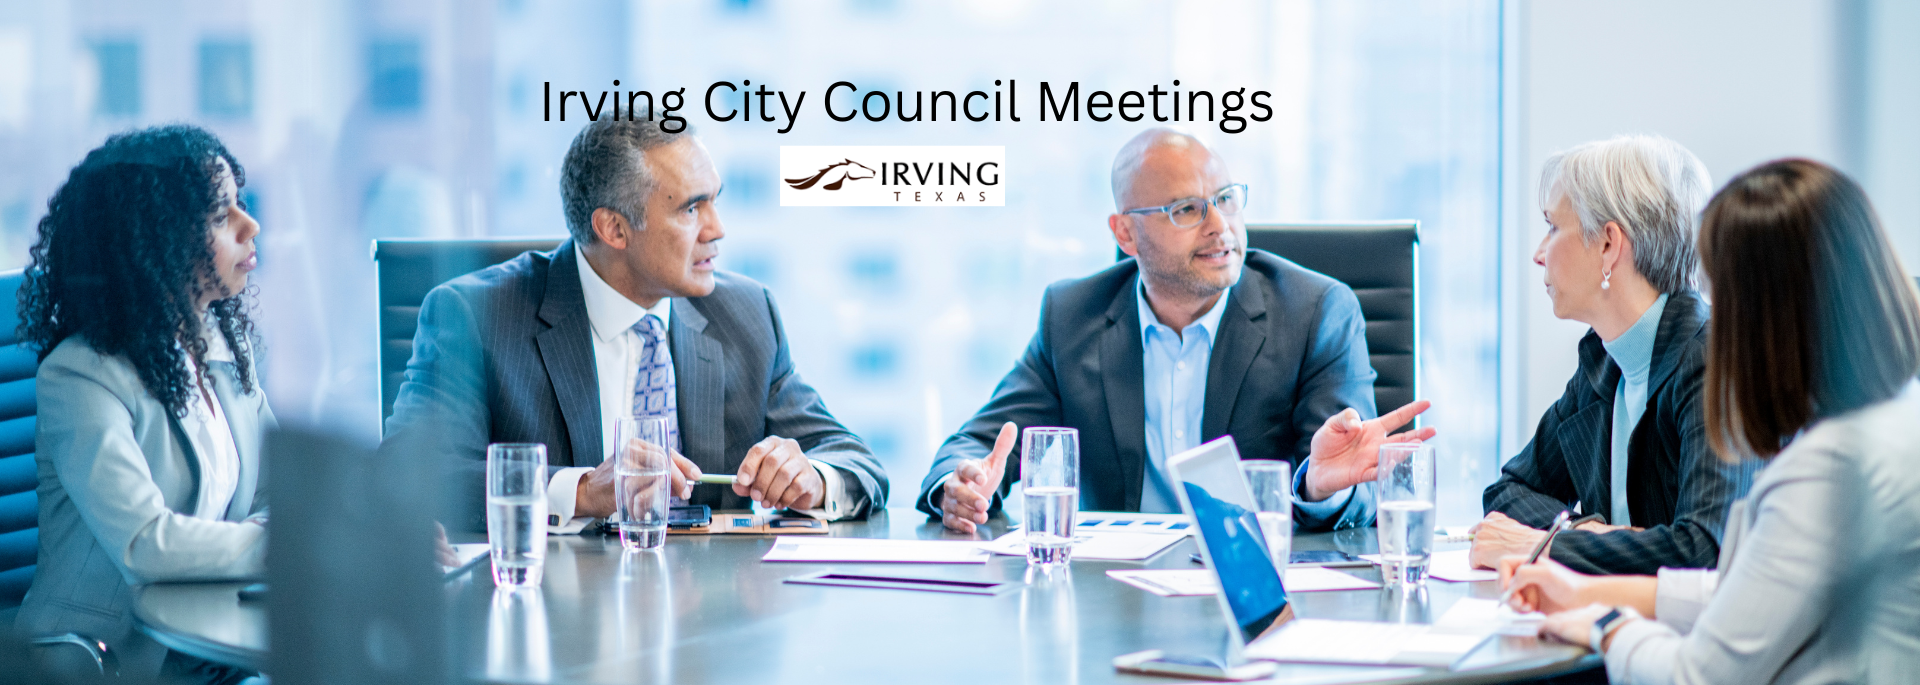 Irving TX City Council Meetings